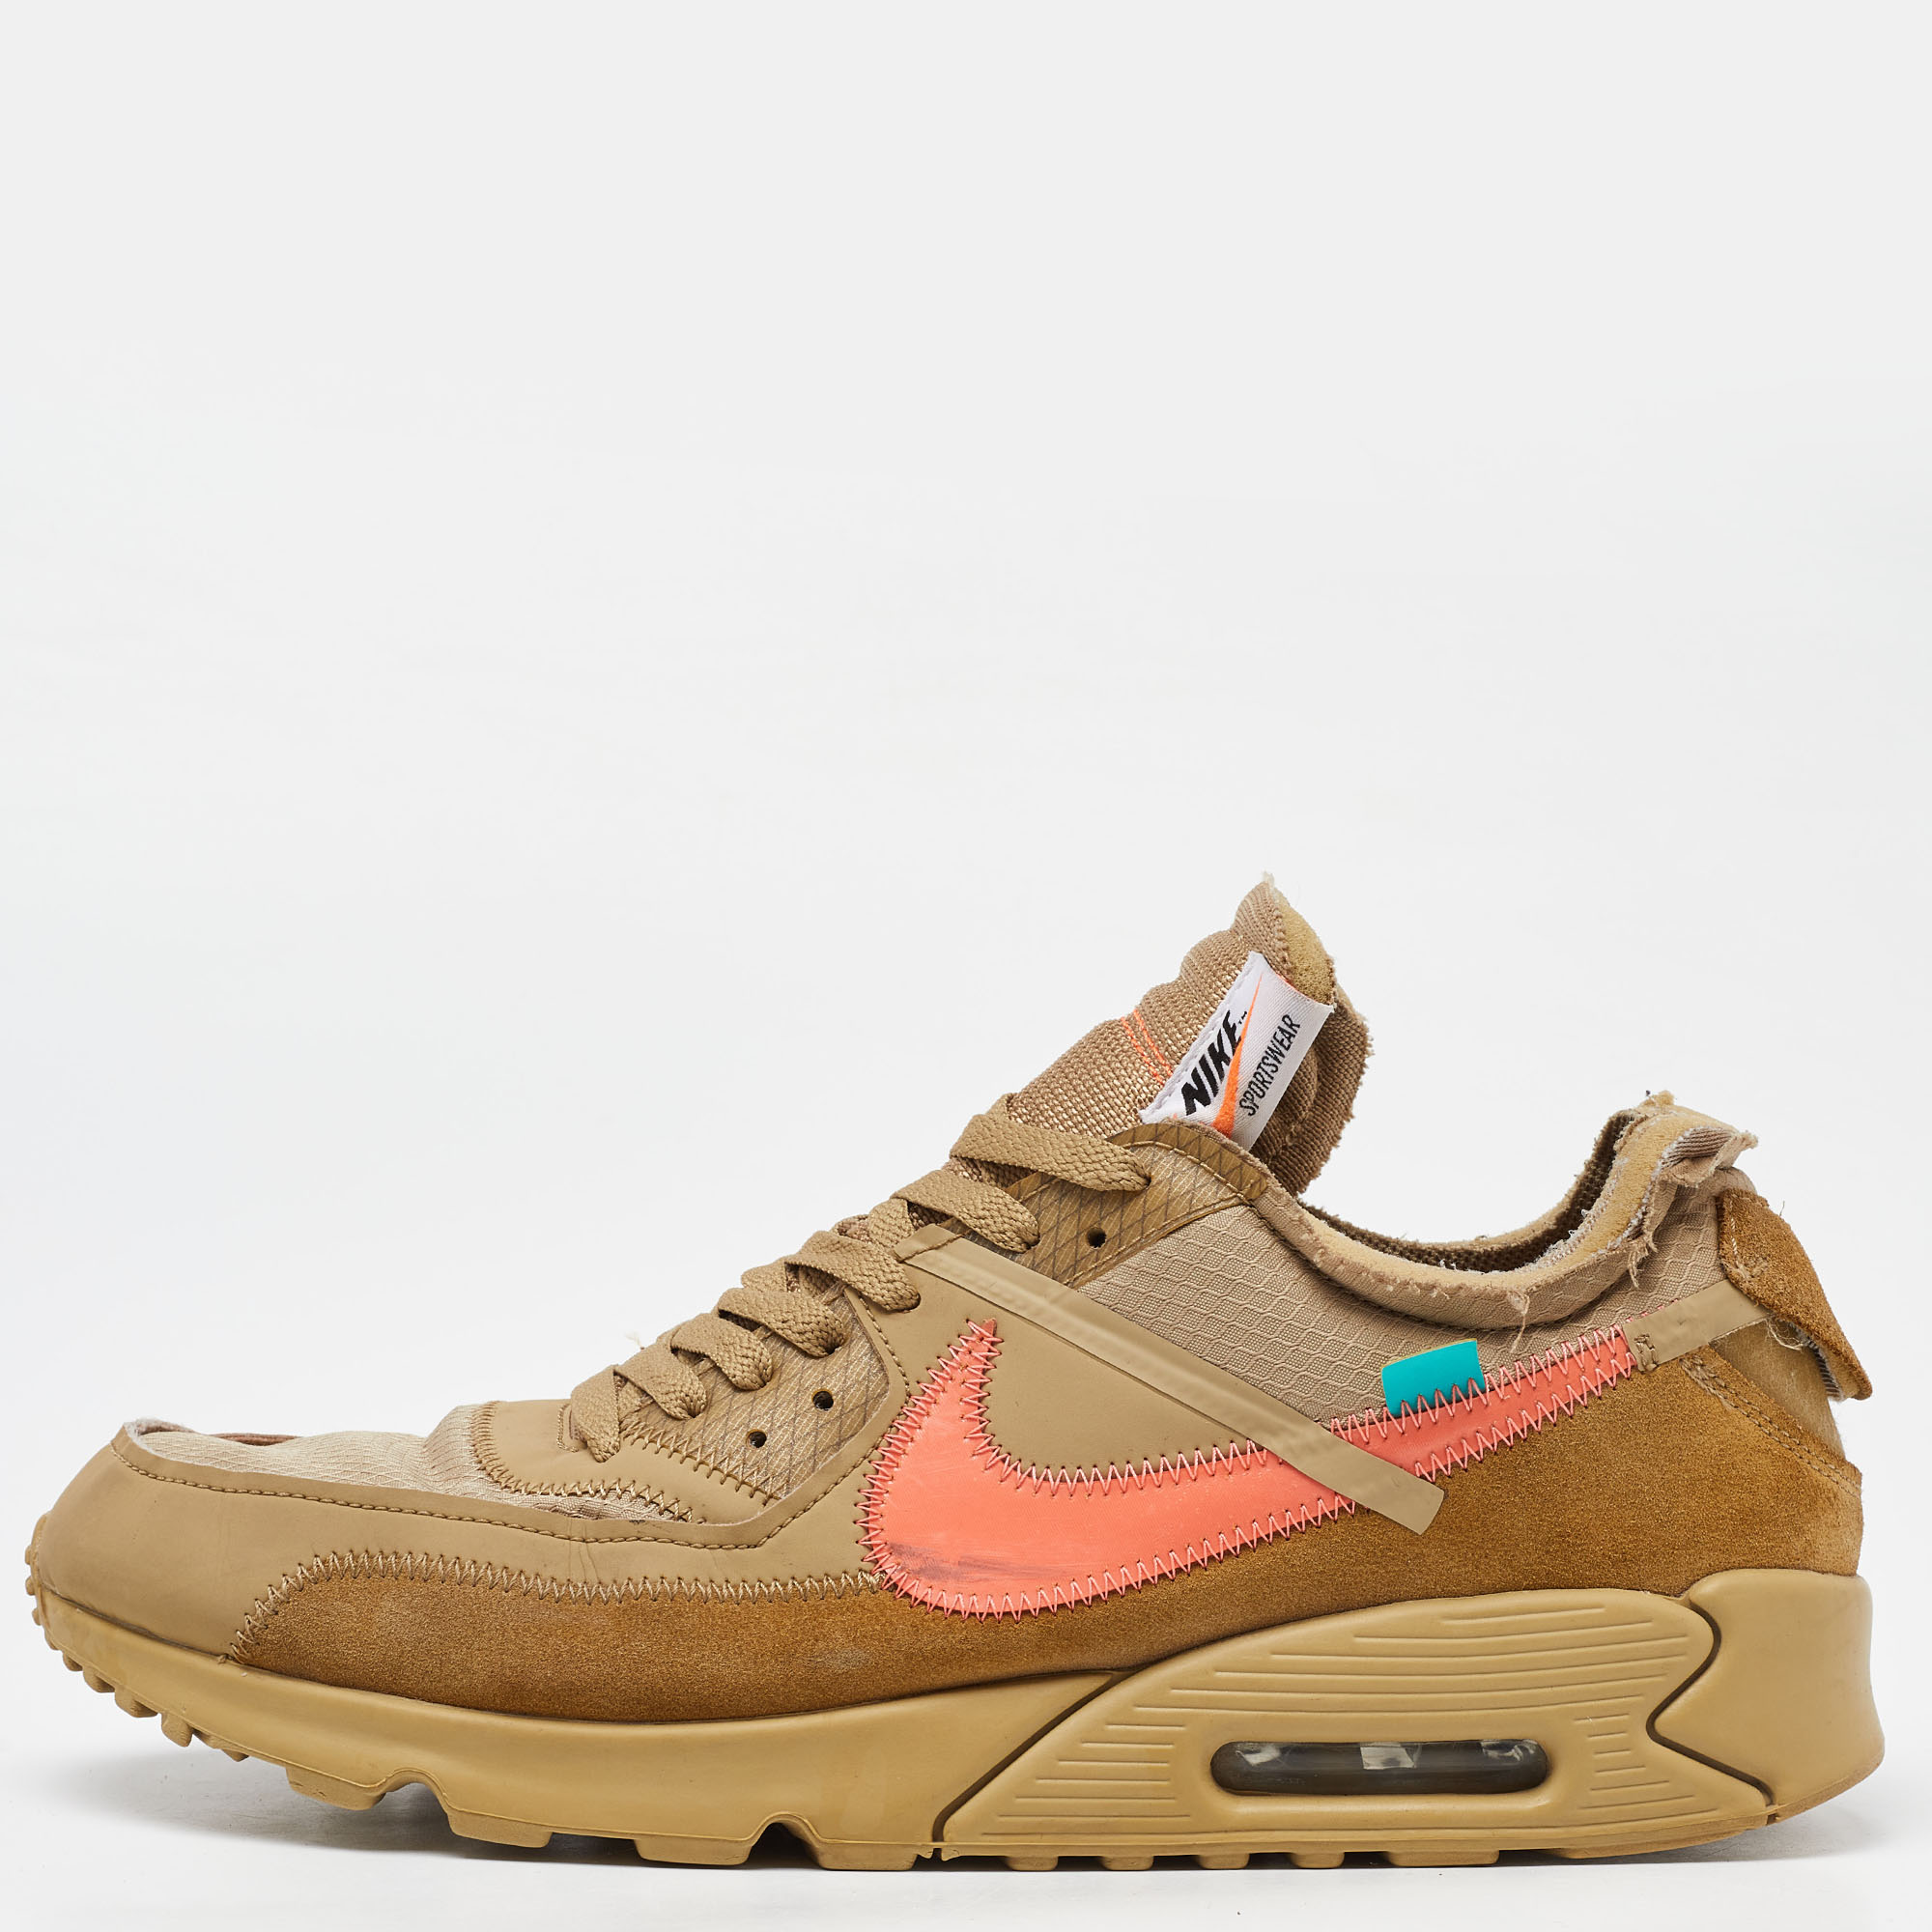 

Off-White x Nike Beige Fabric and Suede Air Max 90 Desert Ore Sneakers Size 43